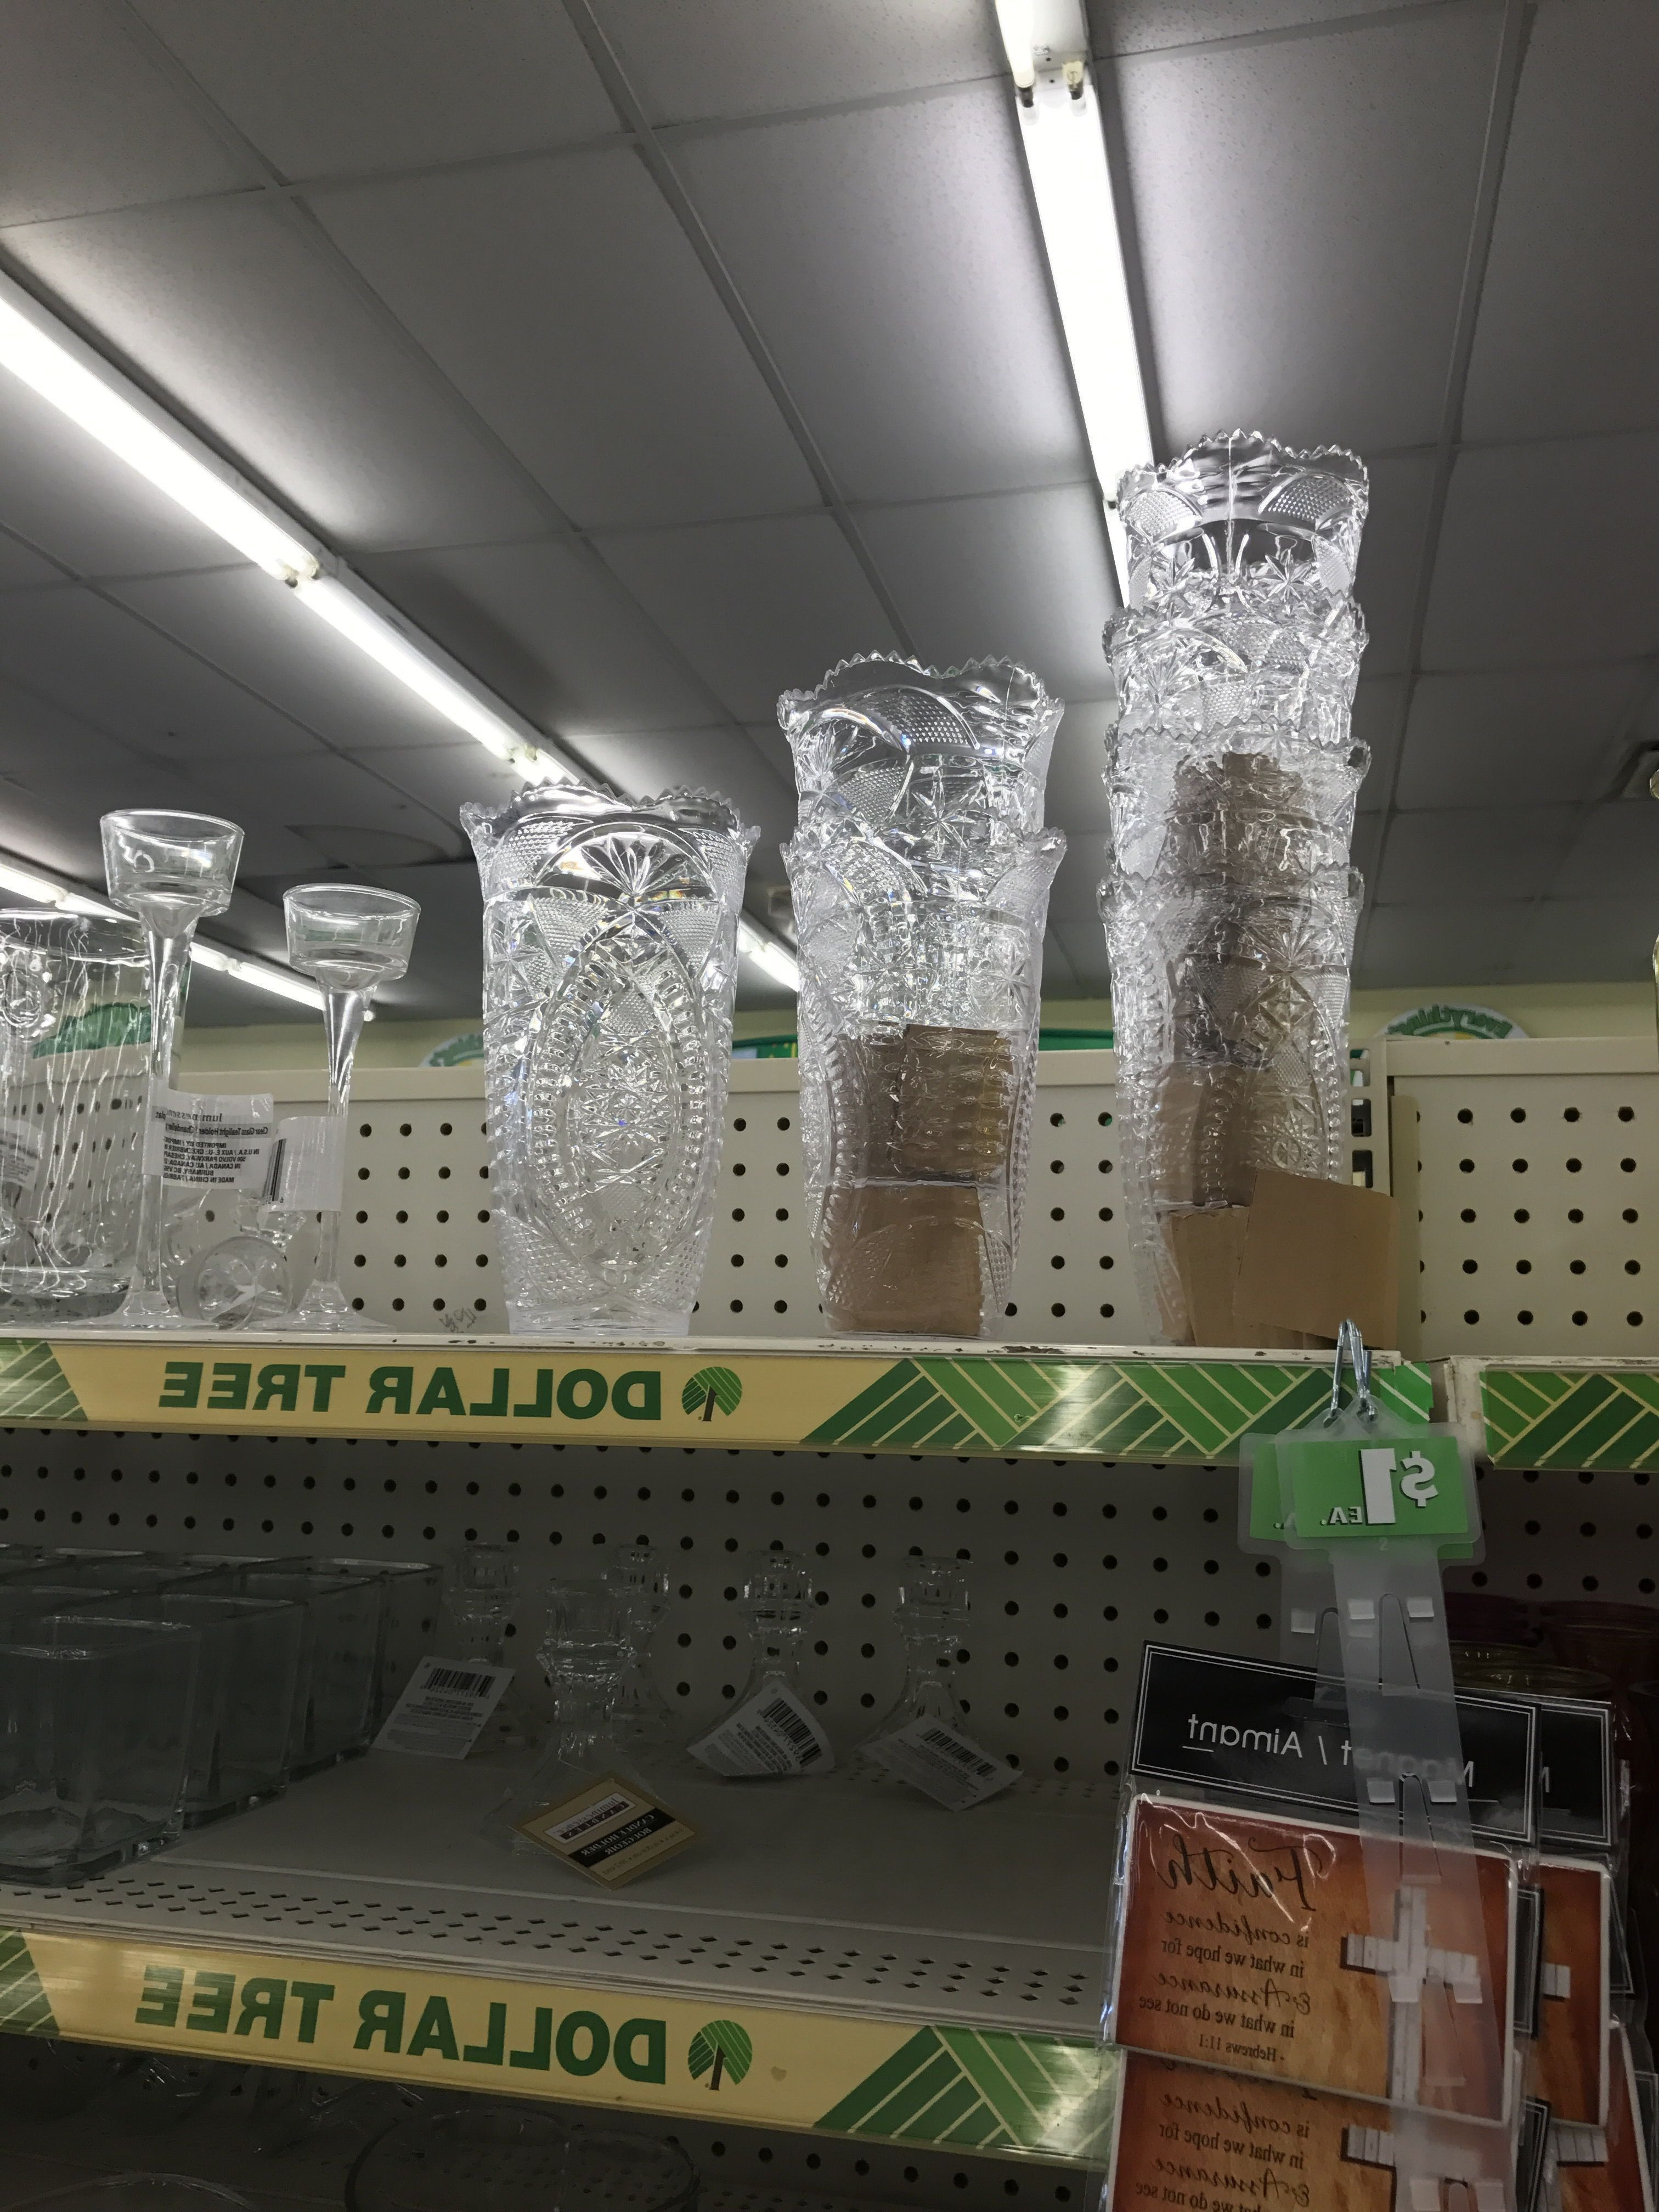 22 Awesome Dollar Tree Tall Vases 2024 free download dollar tree tall vases of tall gold vases inspirational weddings decorations fresh dollar tree in tall gold vases inspirational weddings decorations fresh dollar tree wedding decorations awe